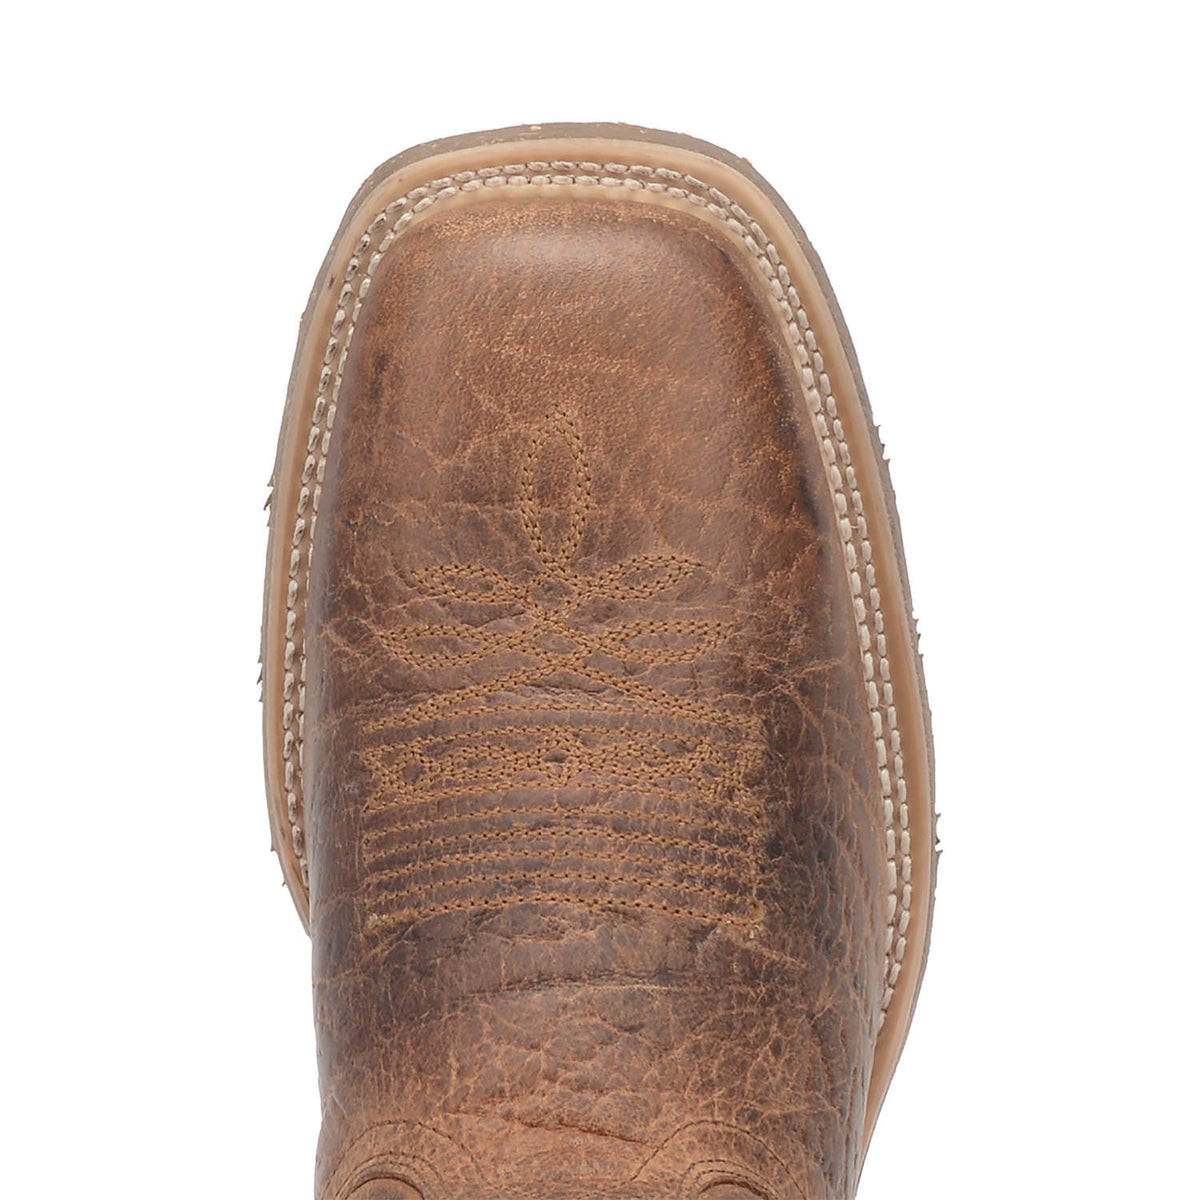 DURANT LEATHER BOOT Image